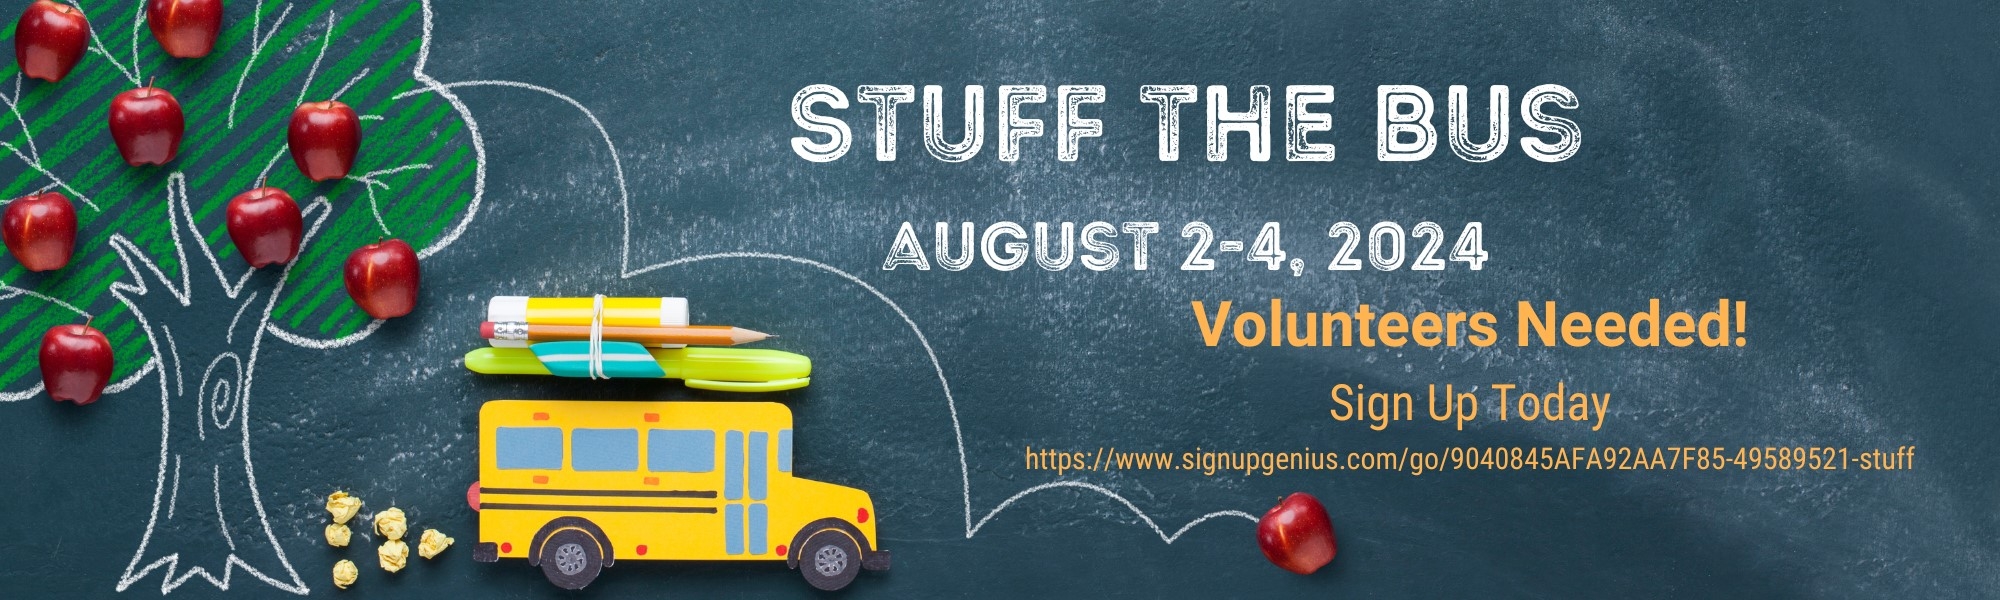 Stuff the Bus is August 2-4, 2024.